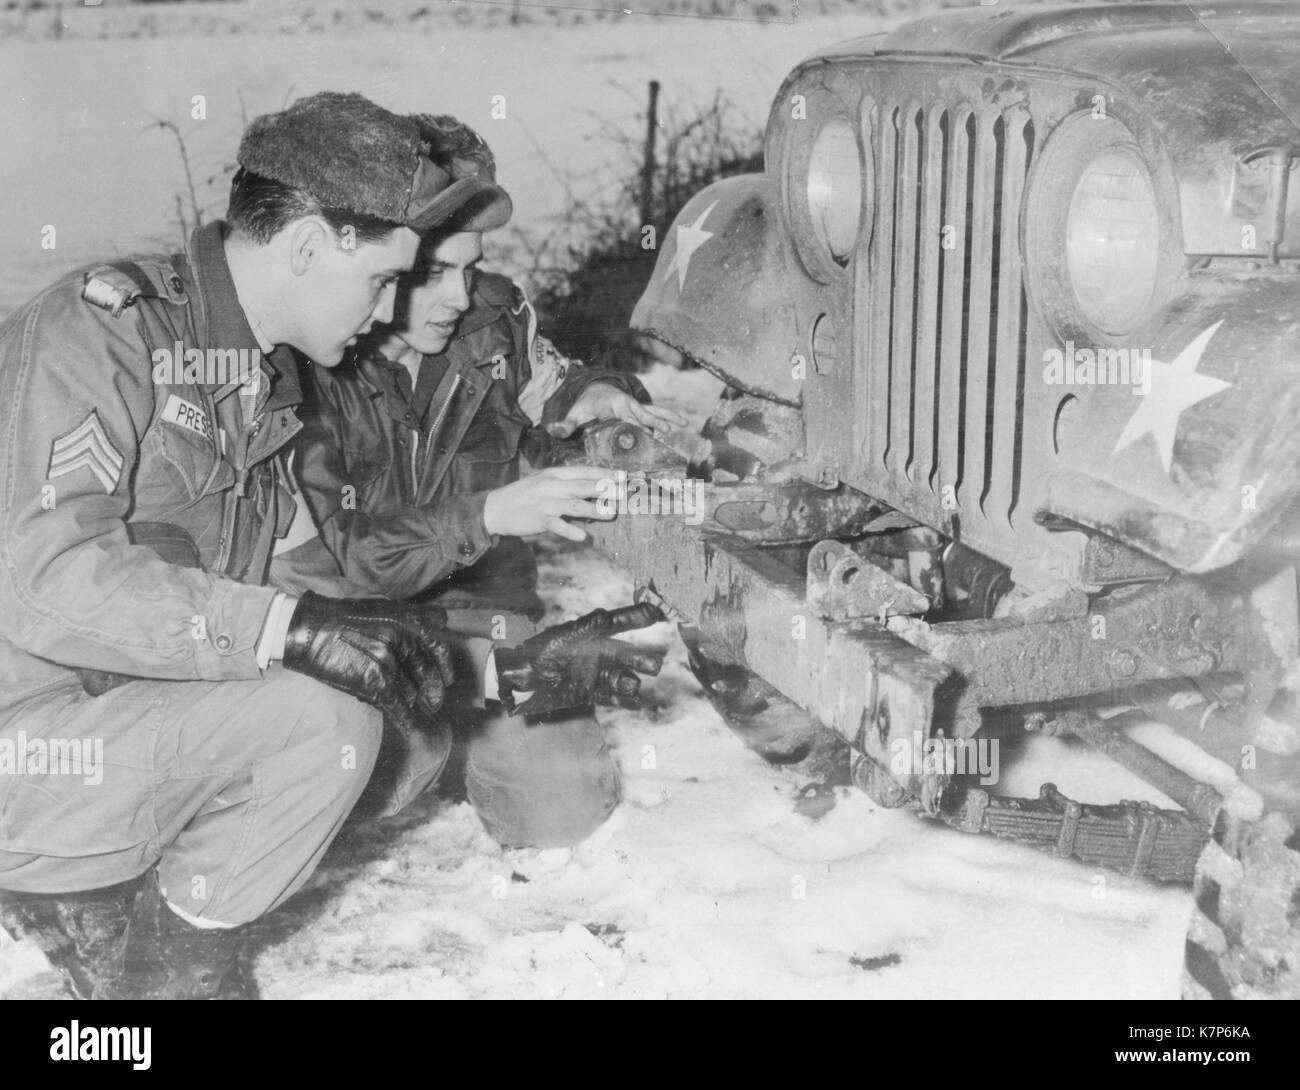 1960 - Sgt Elvis Presley checks jeep with fellow 32nd Armor scout Pvt Lonnie Wolfe, driver of Presley's jeep. Stock Photo